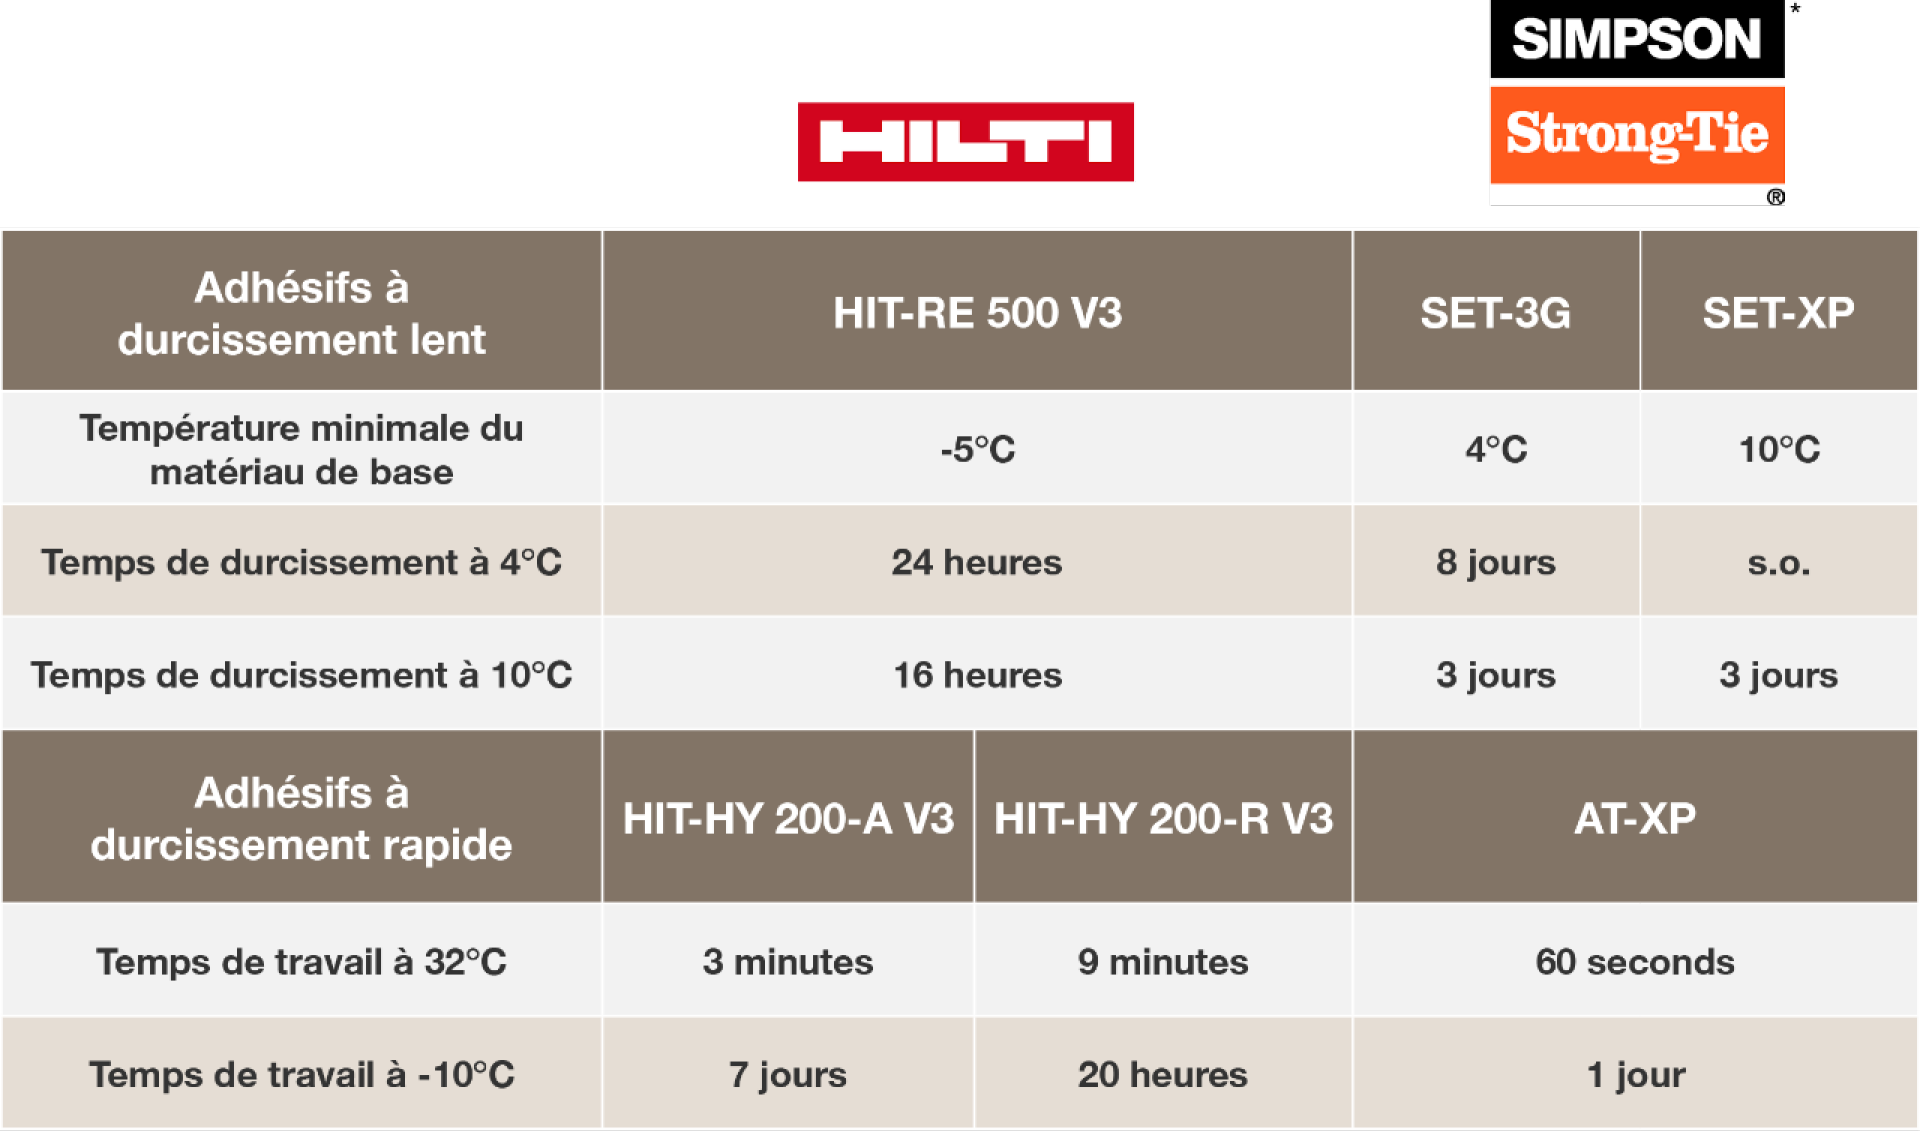 Hilti vs Simpson StrongTie slow and fast cure adhesive comparison table; slow cure adhesives; HIT-RE 500 V3; SET-3G; SET-XP; minimum base material temperature; 23°F; 40°F; 50°F; Cure time at 40°F; 24 hours; 8 days; NA; cure time at 50°F; 16 hours; 3 days; fast cure adhesives; HIT-HY-200-A; HIT-HY-200-R; AT-XP; working time at 90°F; 3 minutes; 9 minutes; 60 seconds; working time at 14°F; 7 hours; 20 hours; 1 day